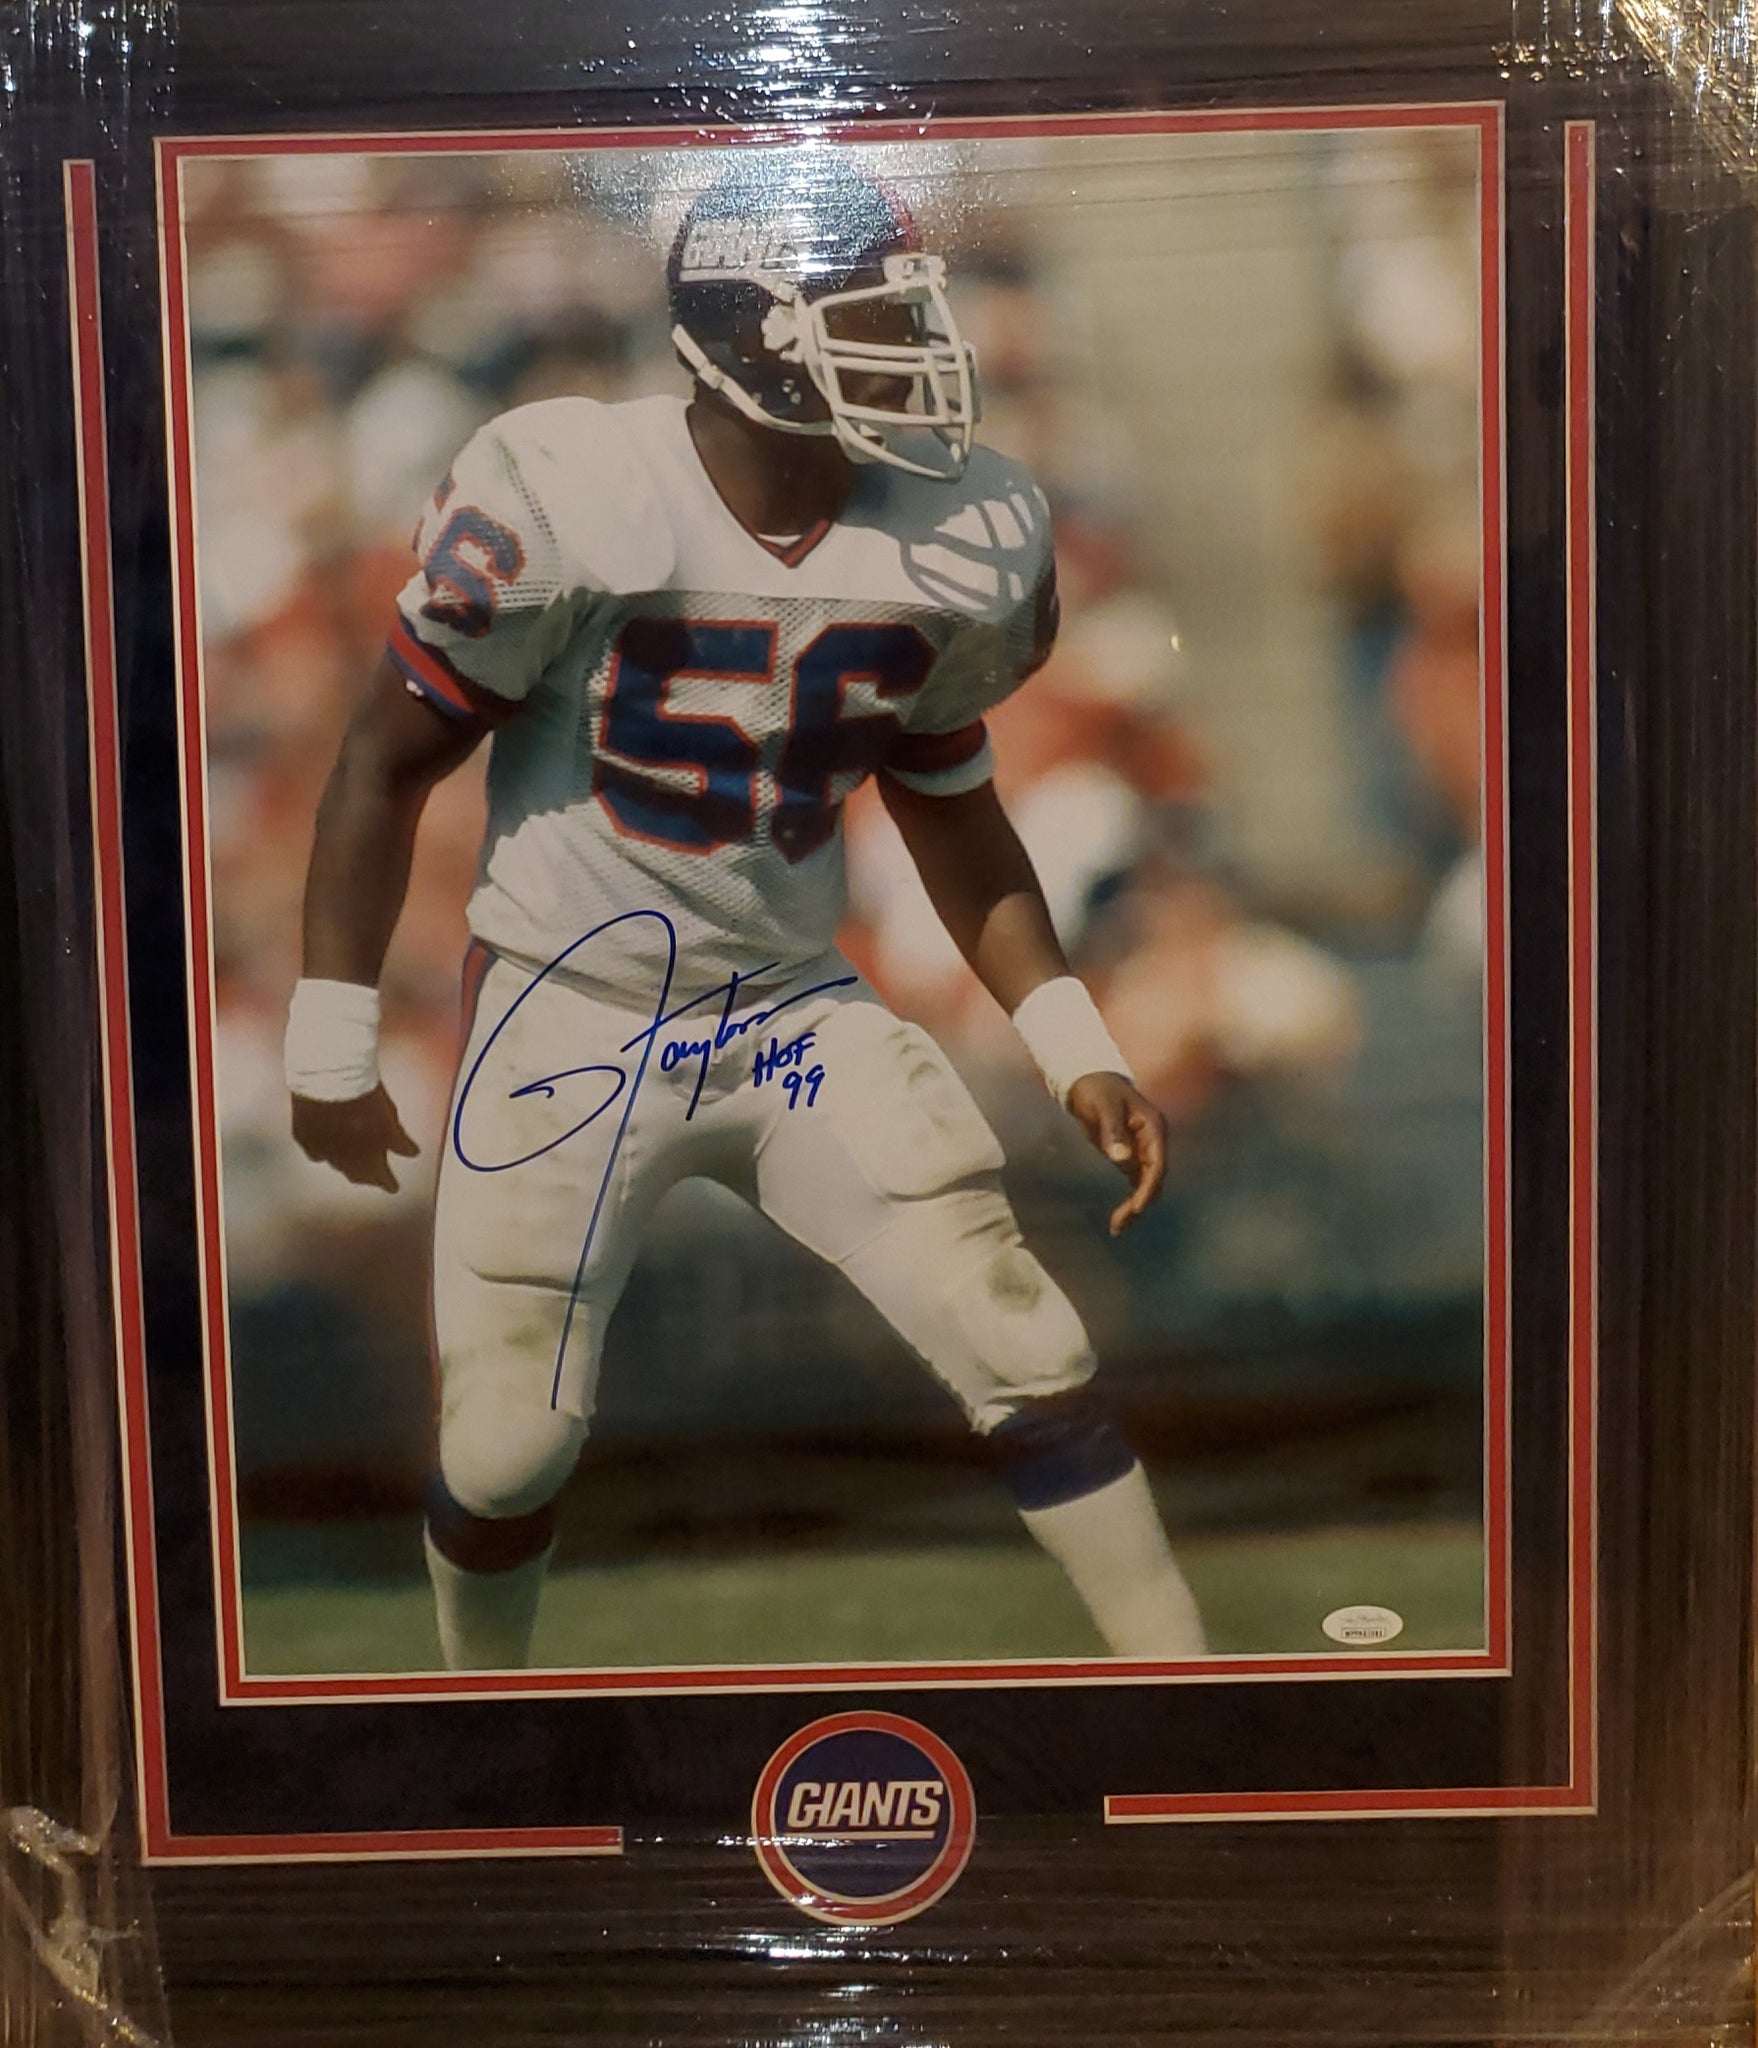 New York Giants Framed Lawrence Taylor Autographed 16x20 with HOF 99 Inscription with Suede Upgrade (JSA)